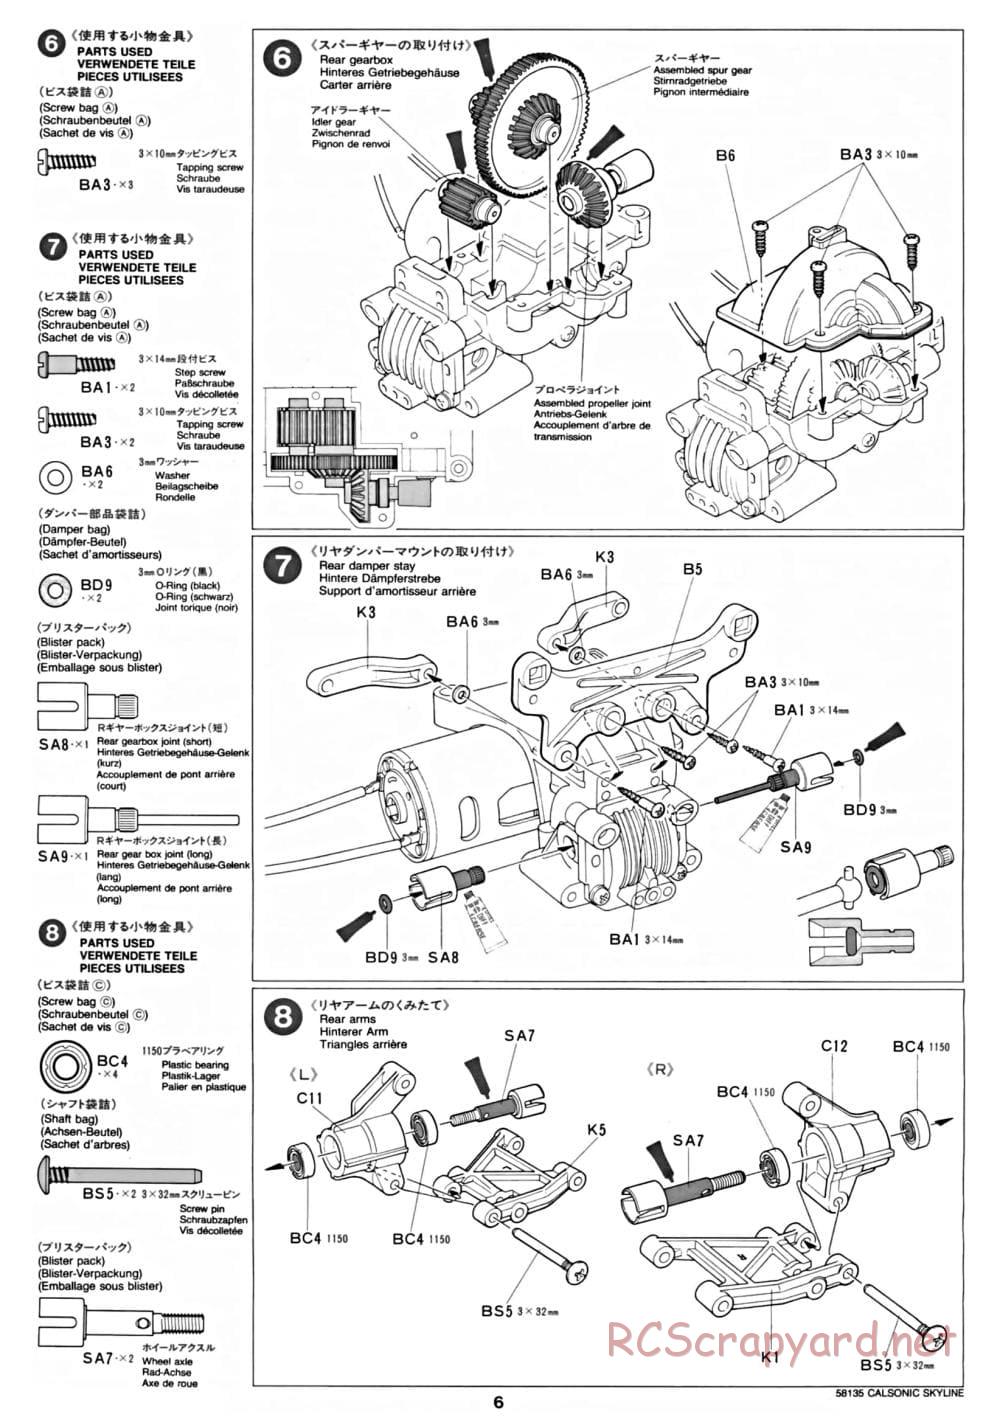 Tamiya - Calsonic Skyline GT-R Gr.A - TA-02 Chassis - Manual - Page 6